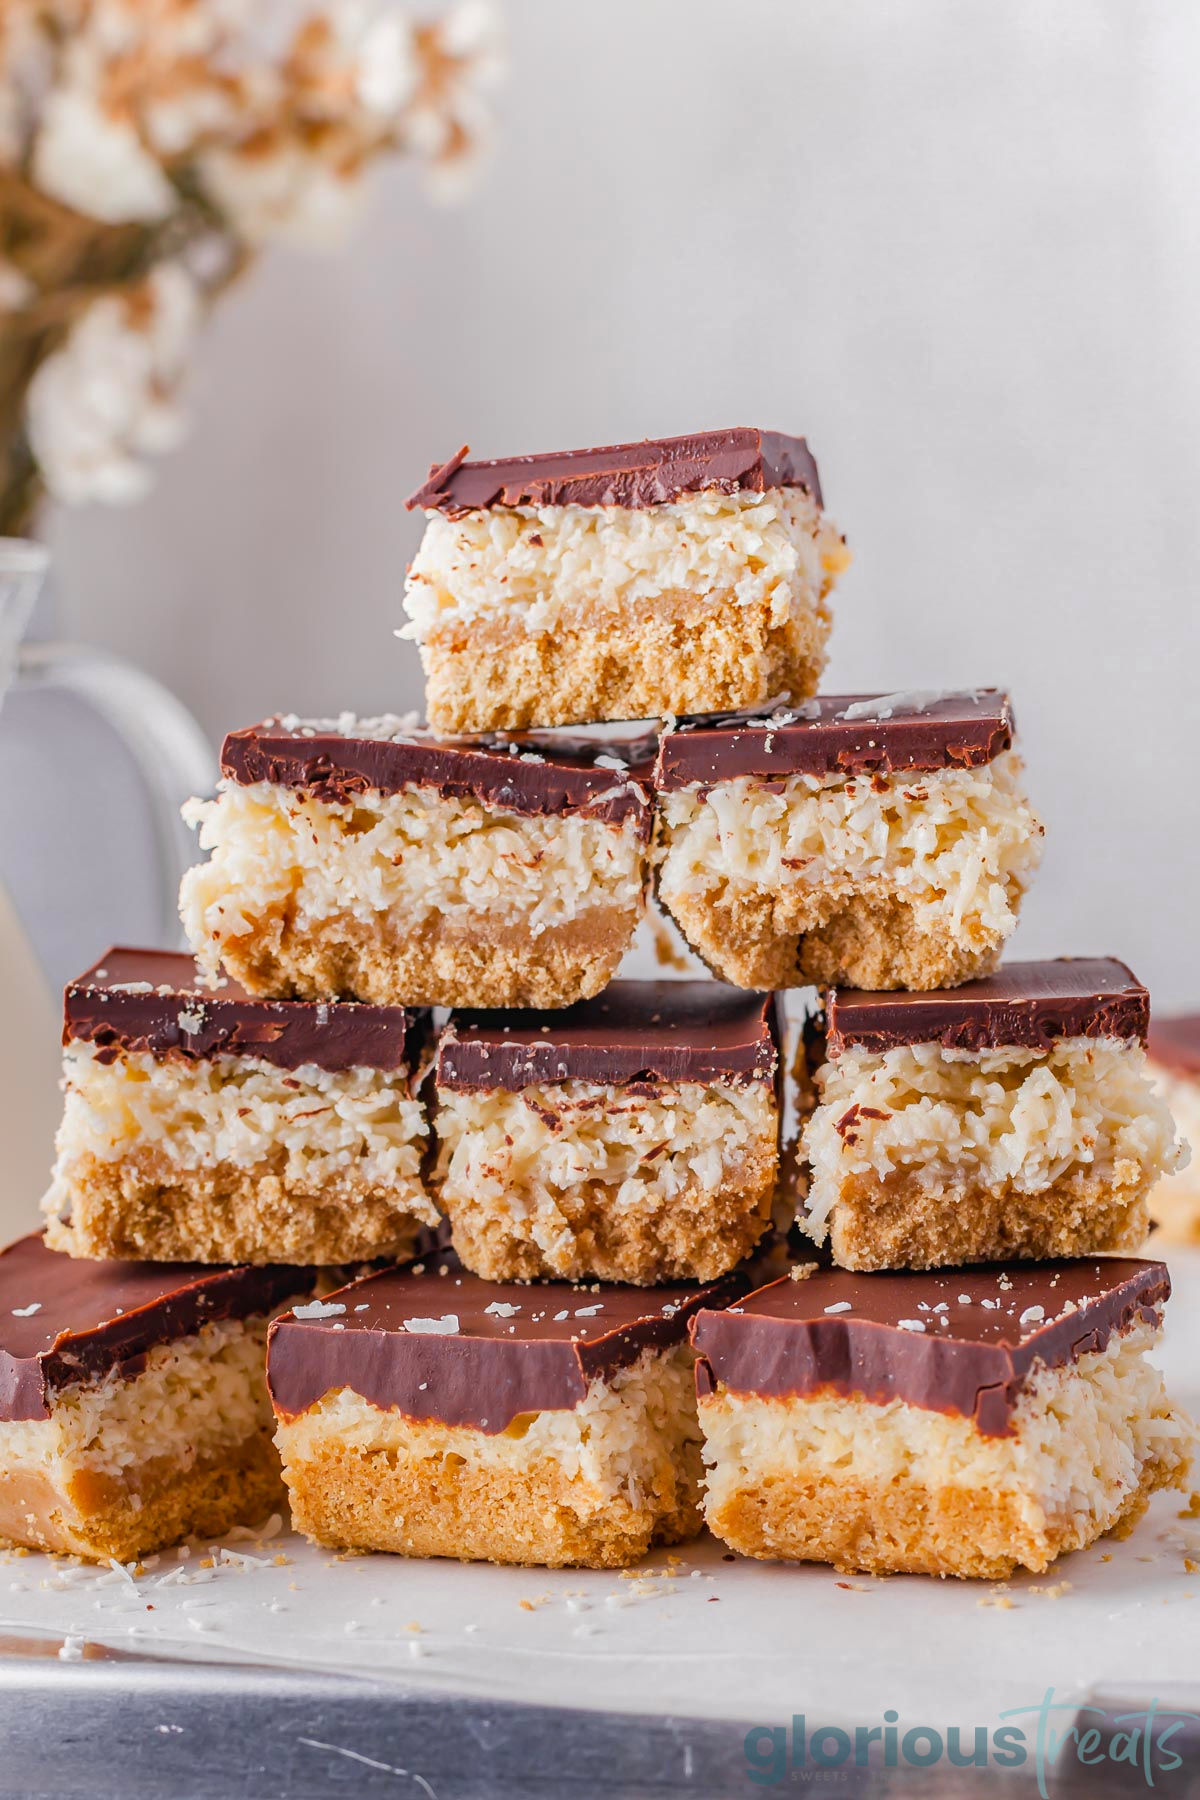 A stack of chocolate coconut candy bars.